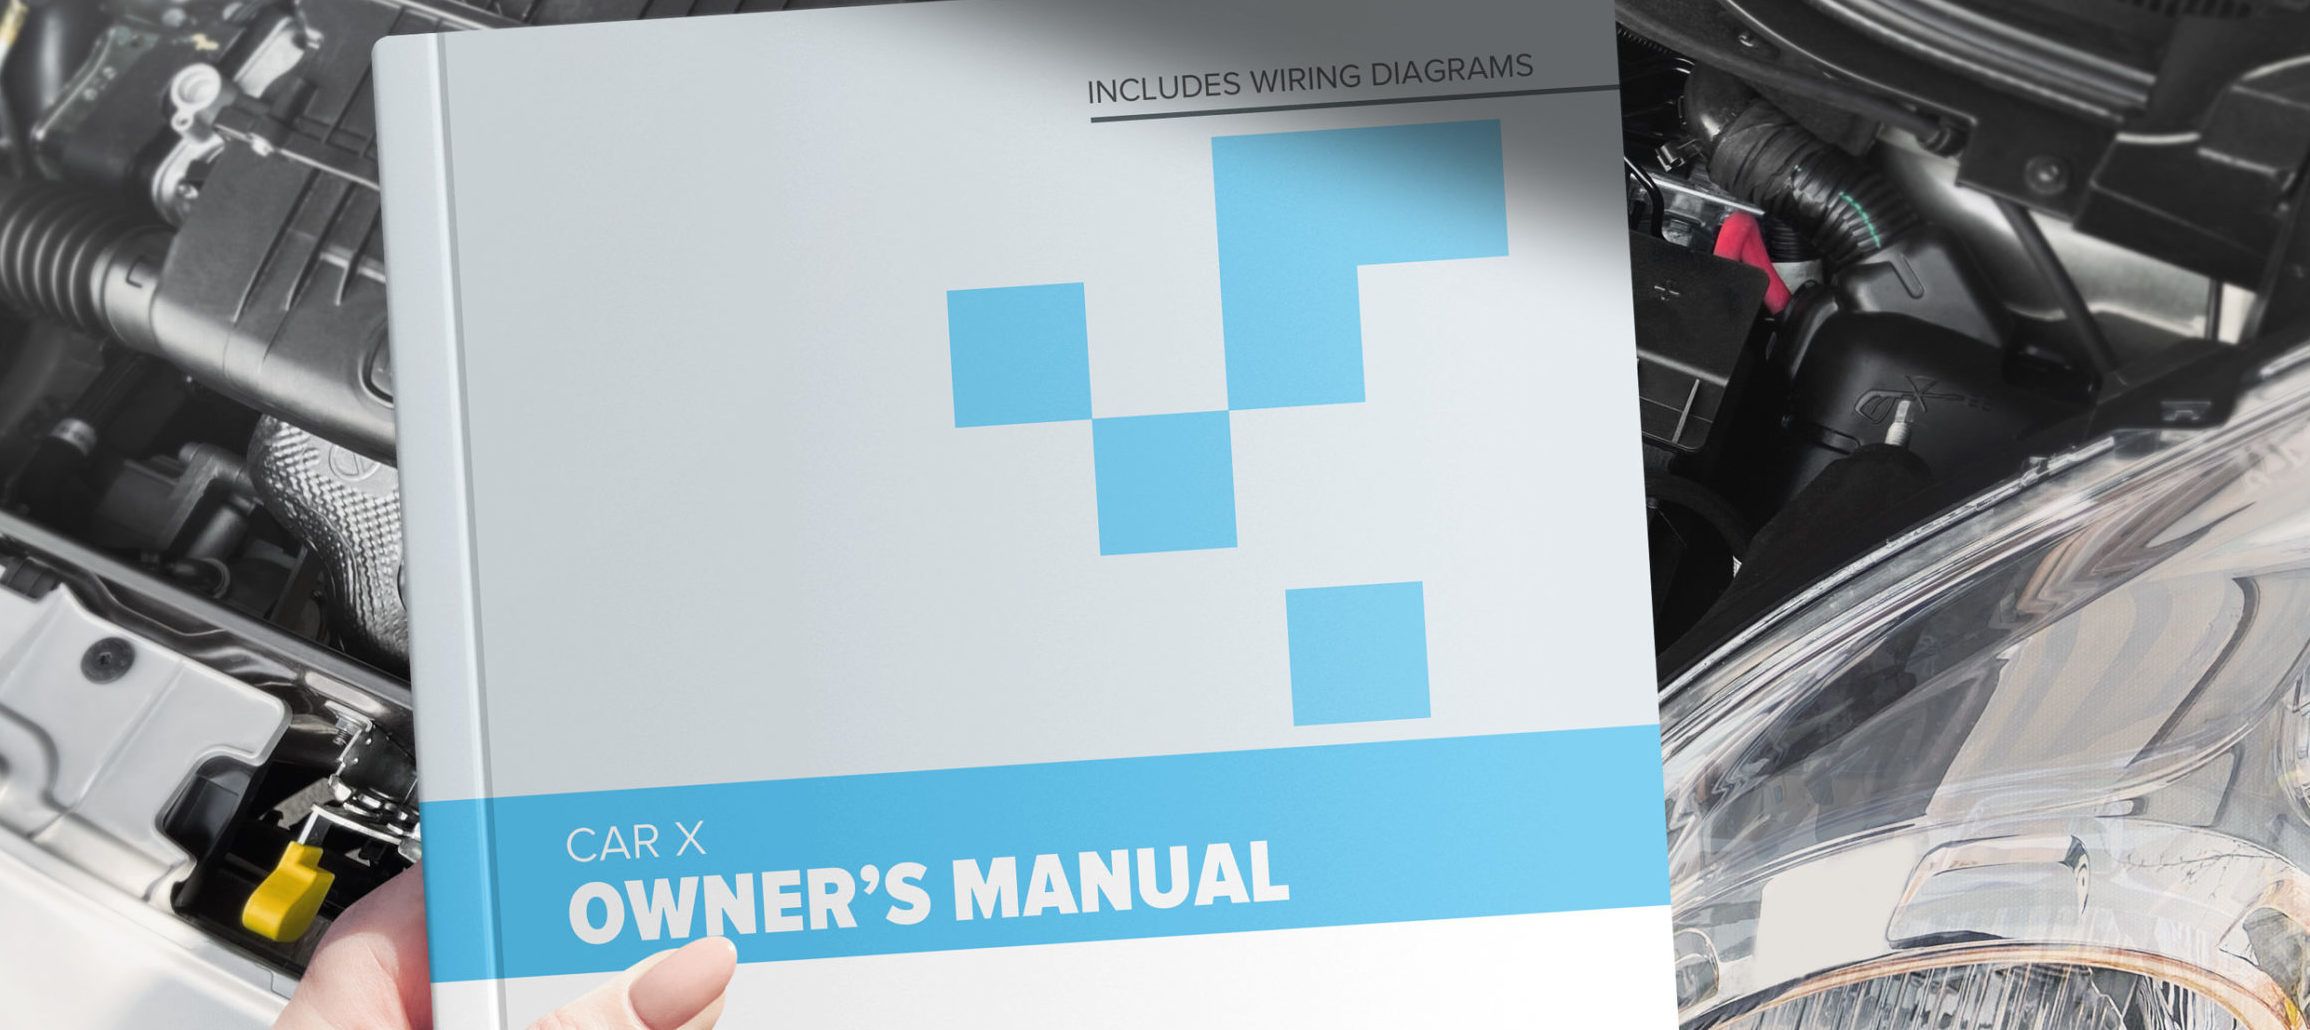 person holding printed product manual